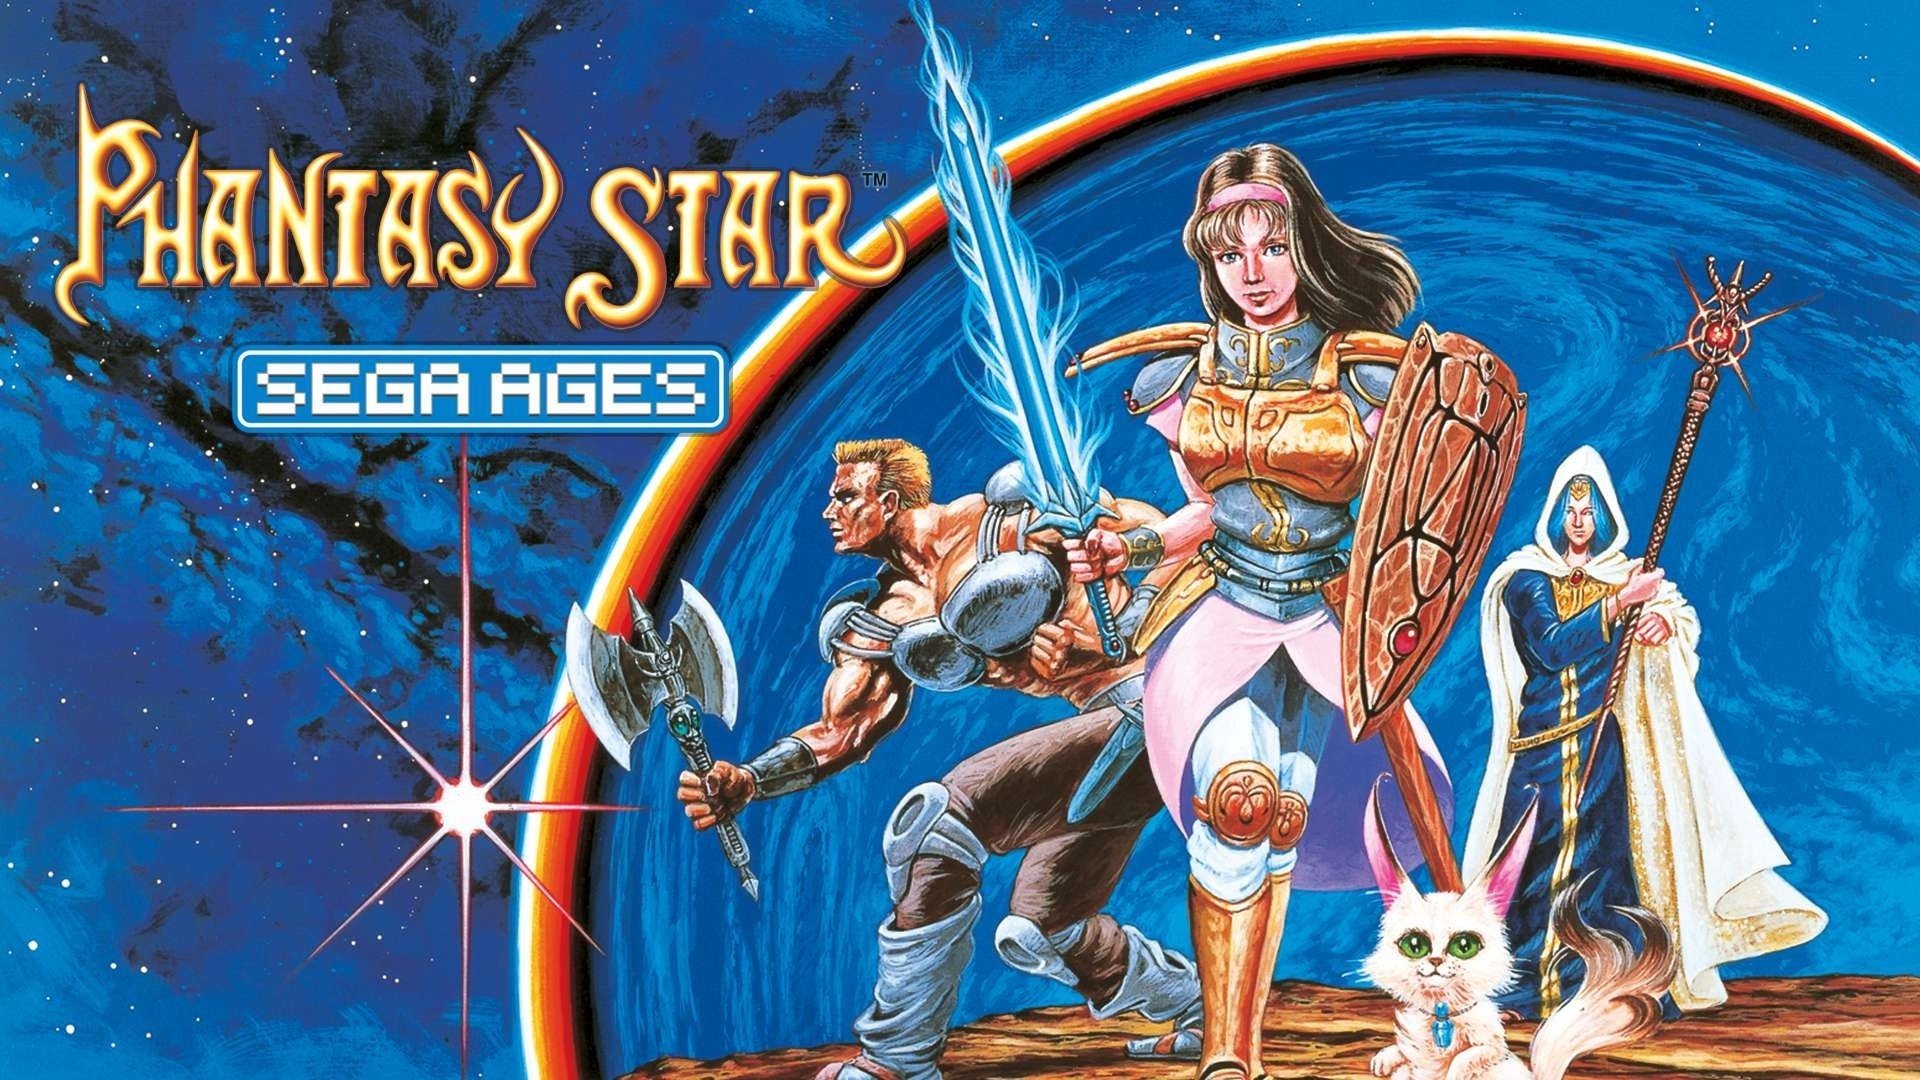 After A Short Delay Phantasy Star Joins Sega Ages Line At The End Of